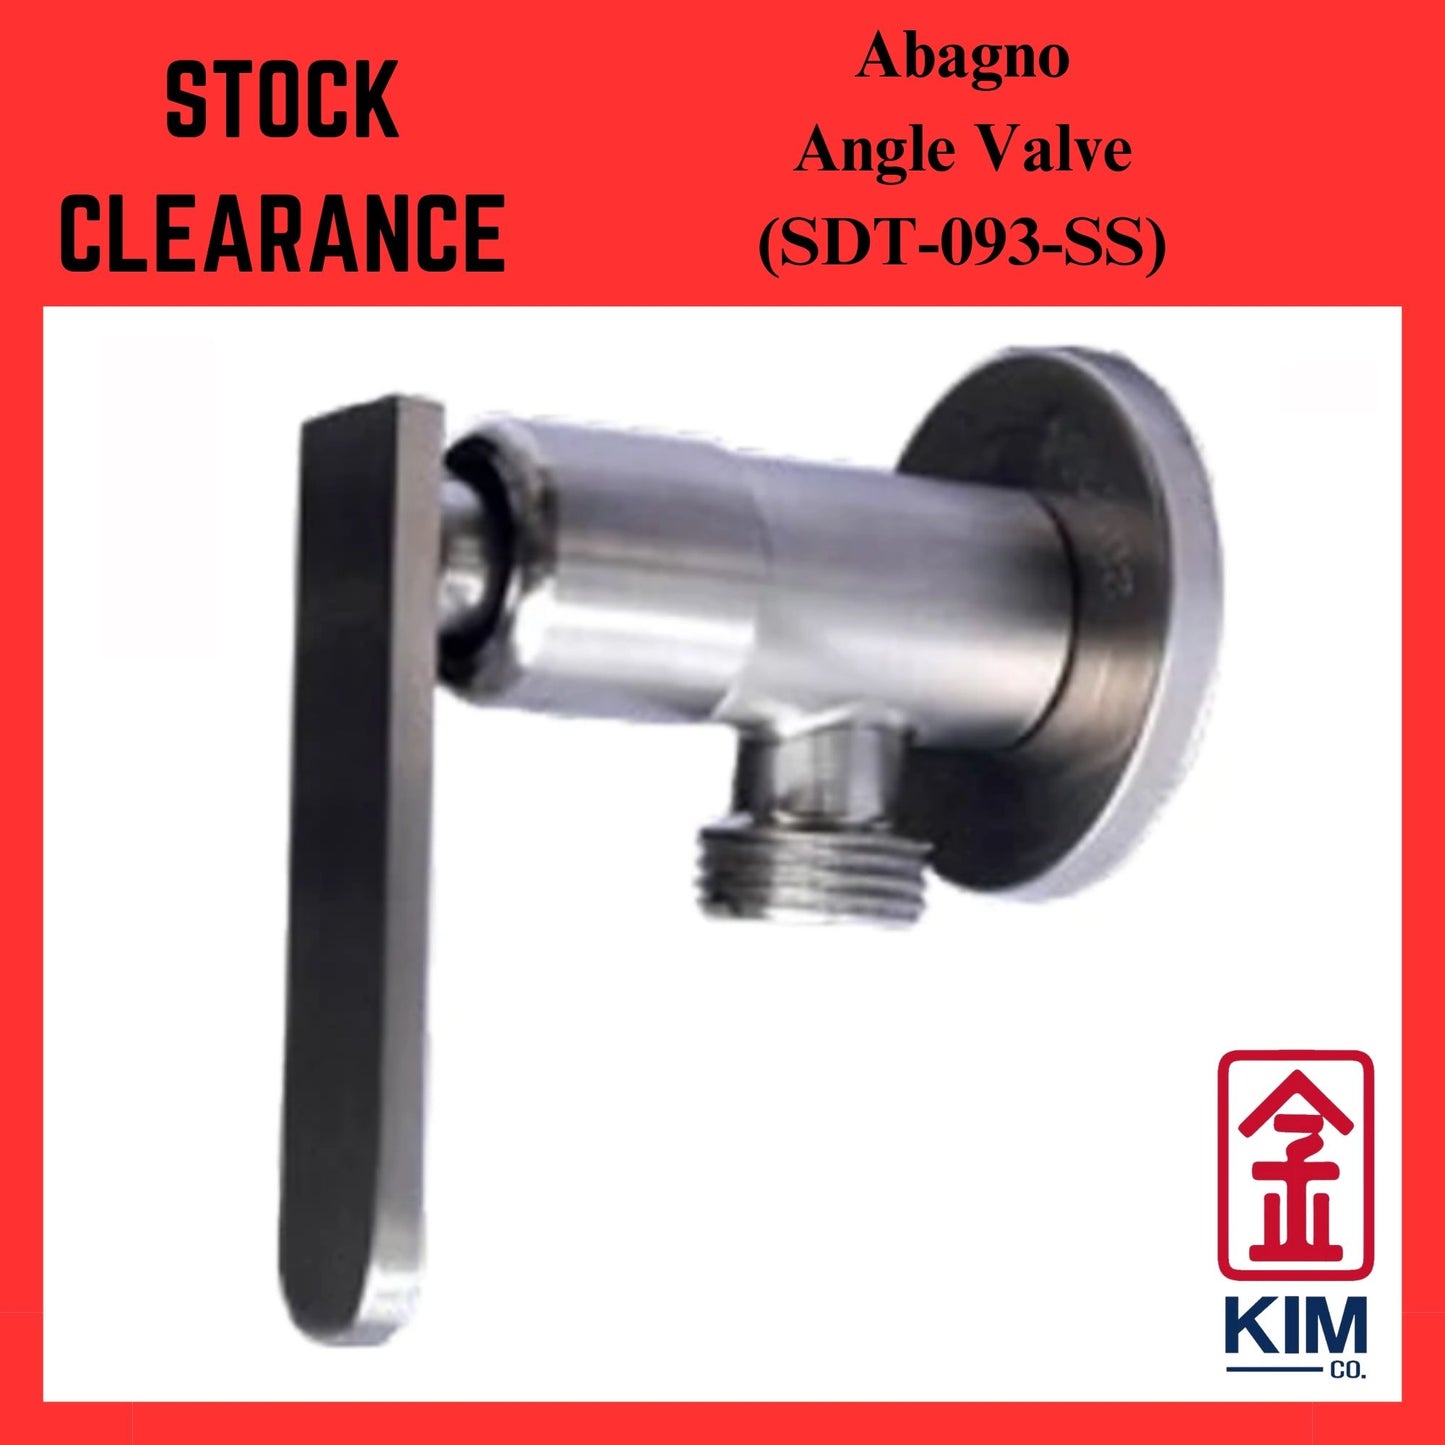 ( Stock Clearance ) Abagno Angle Valve (SDT-093-SS)